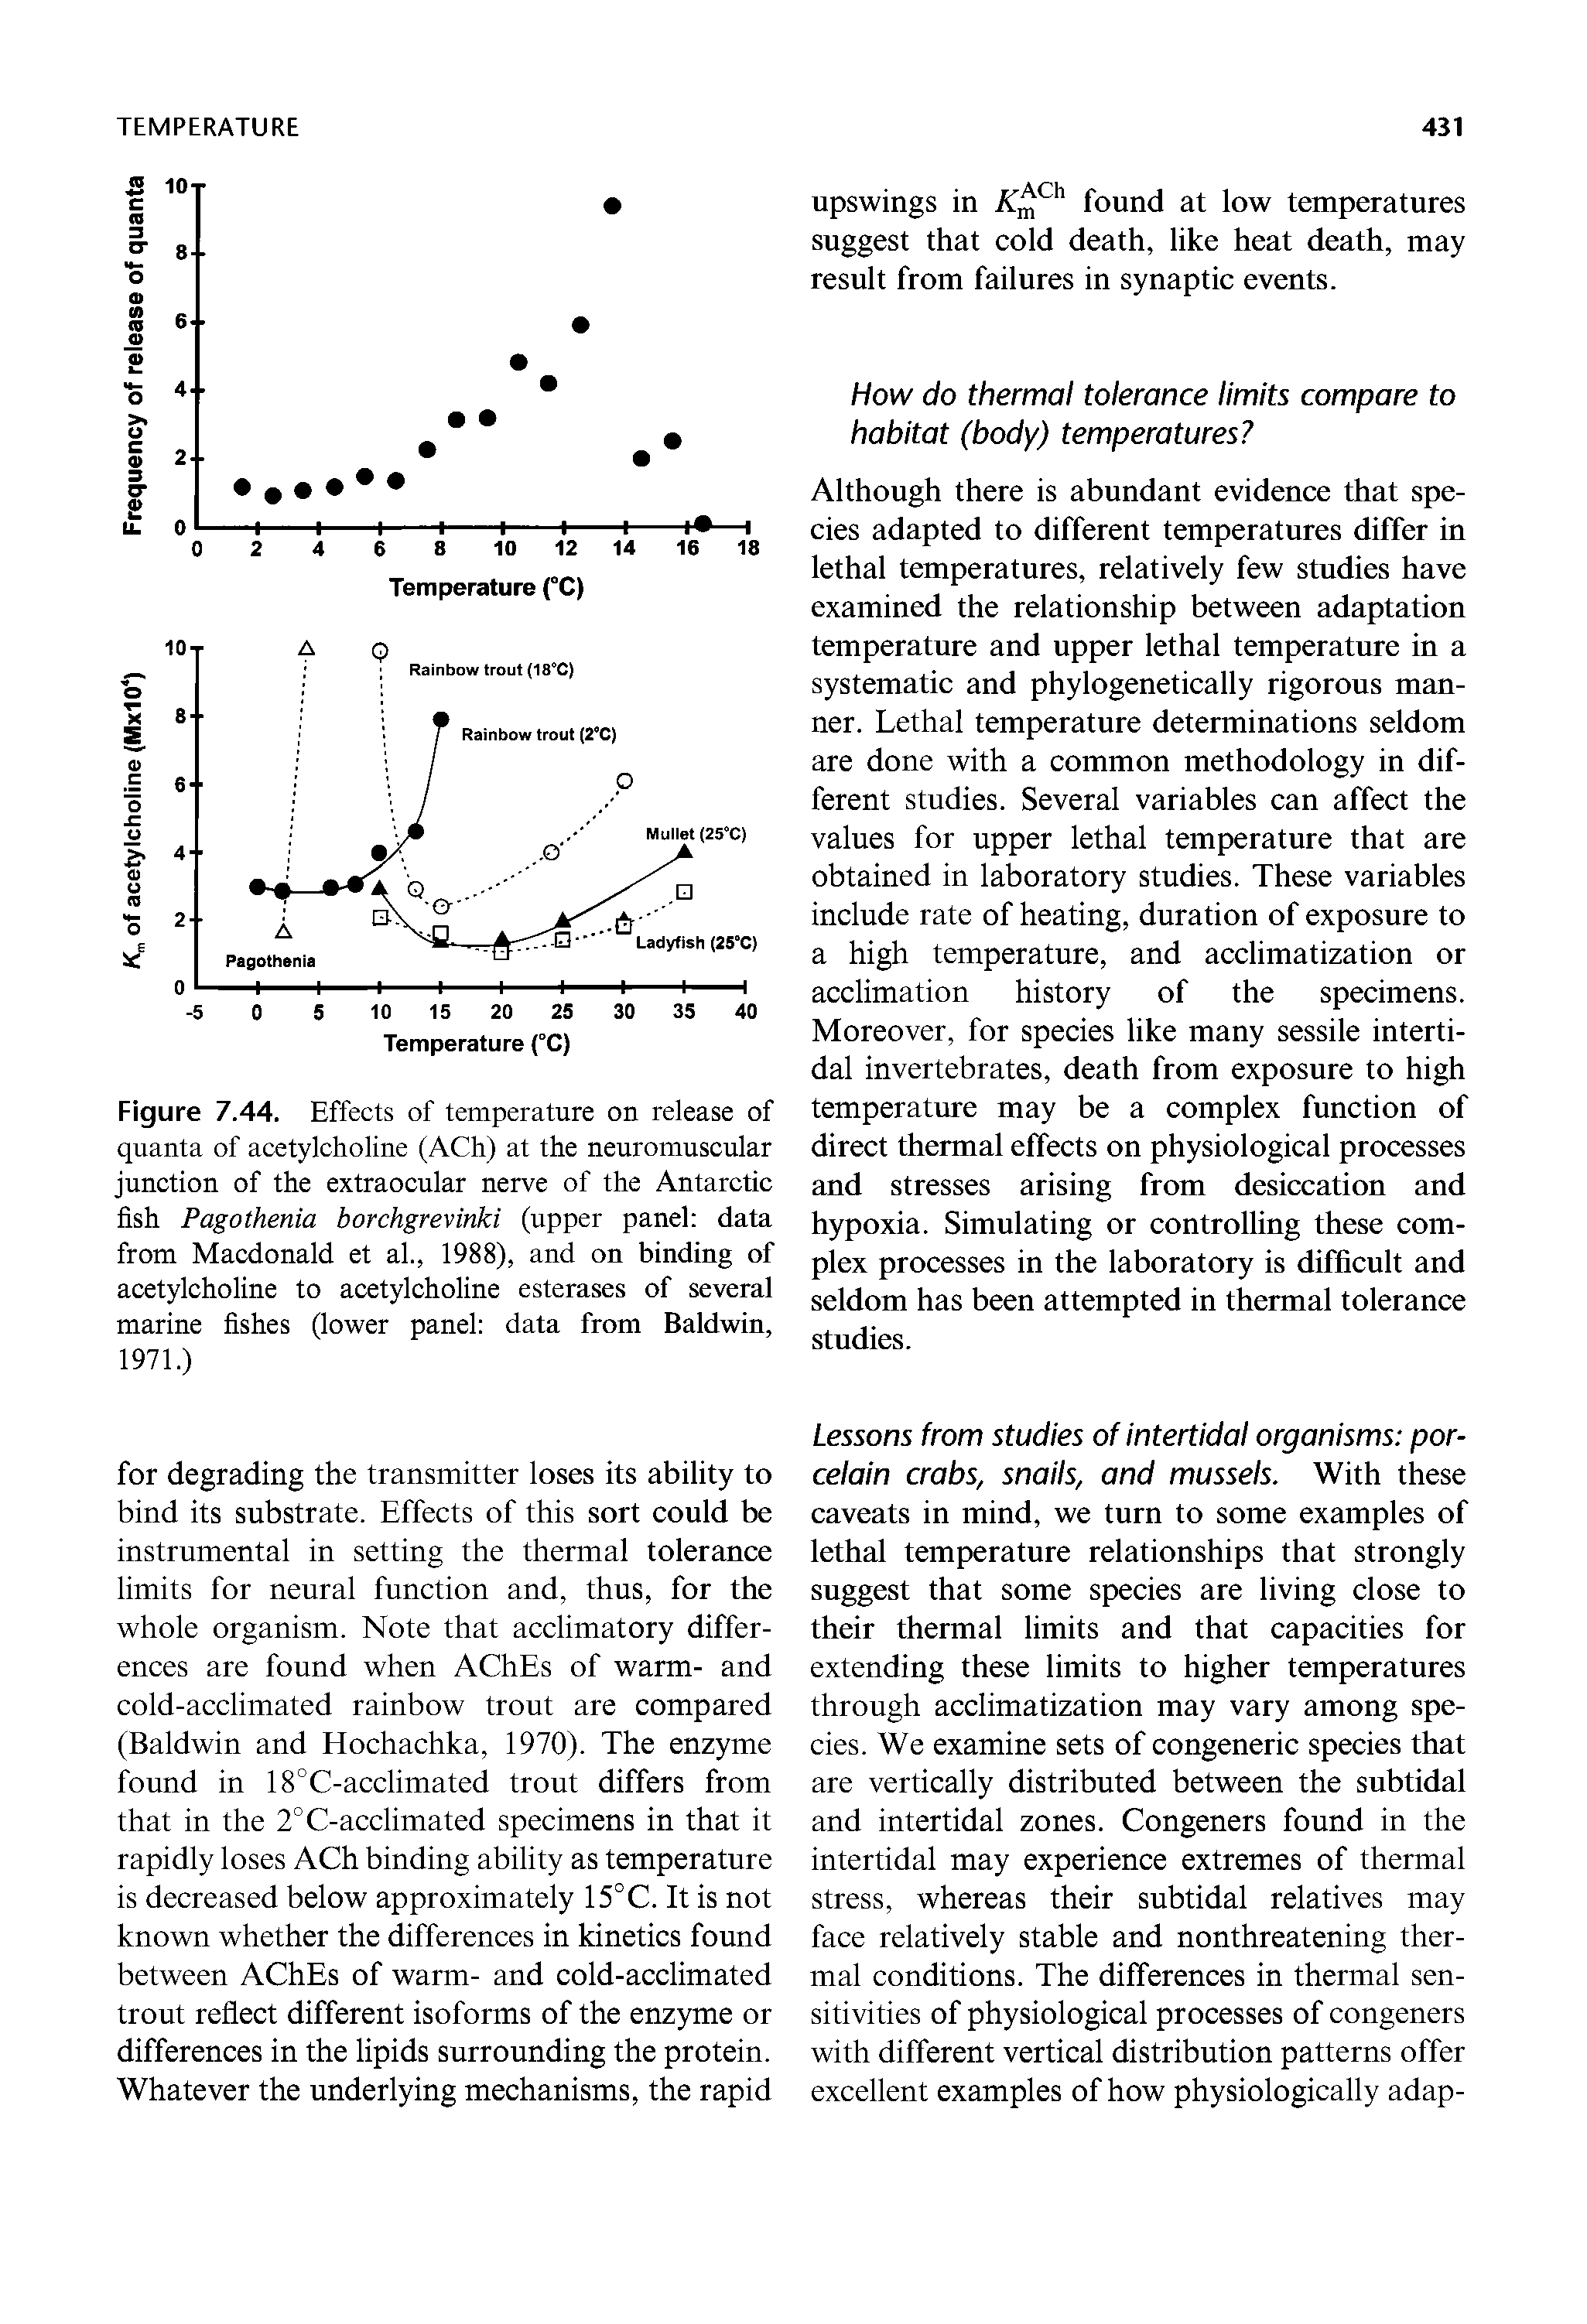 Figure 7.44. Effects of temperature on release of quanta of acetylcholine (ACh) at the neuromuscular junction of the extraocular nerve of the Antarctic fish Pagothenia borchgrevinki (upper panel data from Macdonald et al., 1988), and on binding of acetylcholine to acetylcholine esterases of several marine fishes (lower panel data from Baldwin, 1971.)...